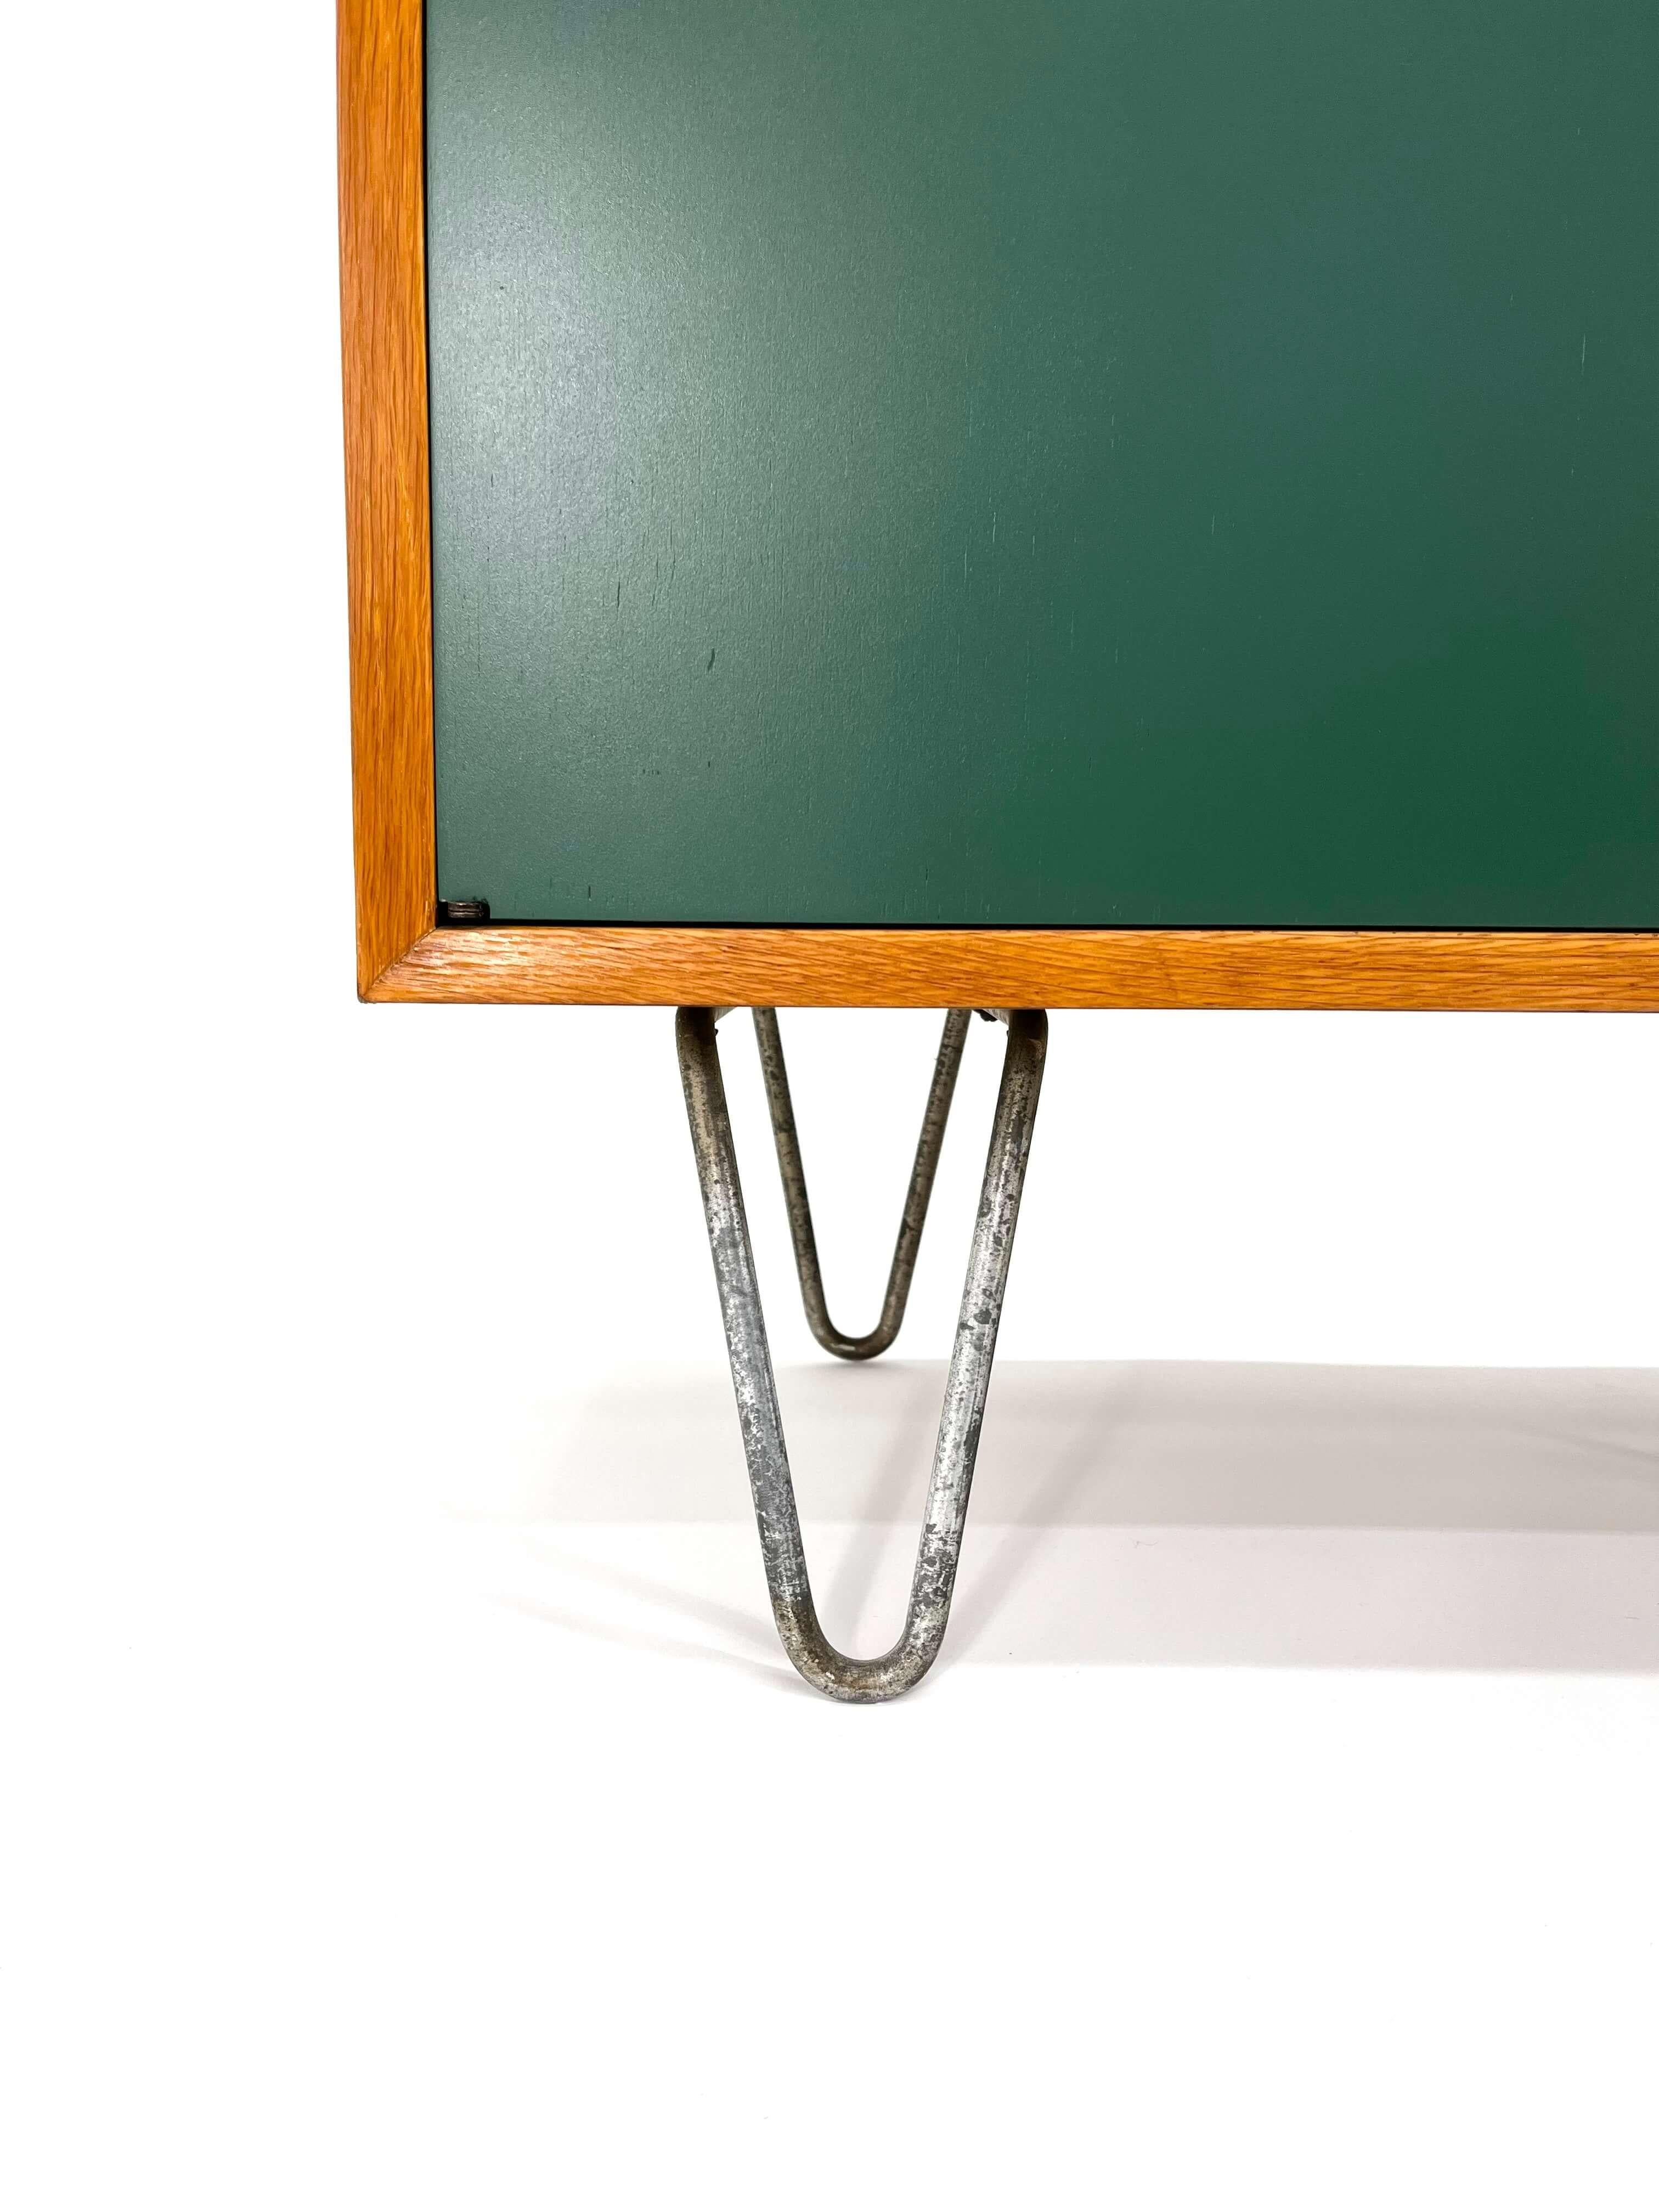 20th Century George Nelson for Herman Miller Cabinet - Green Lacquered doors & Hair Pin Legs